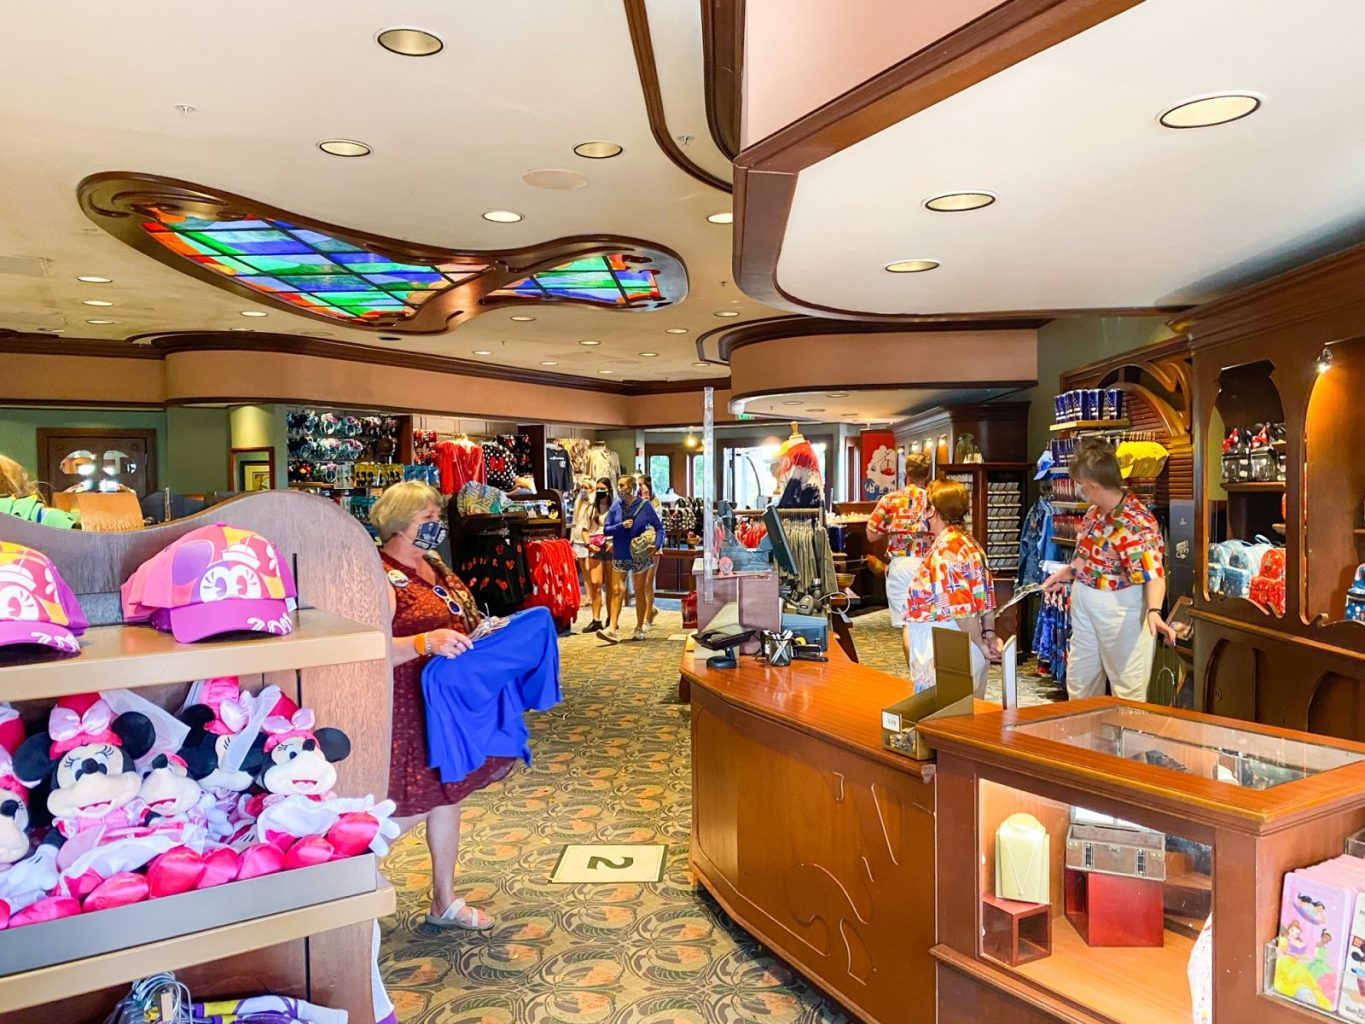 Inside the shop at the Epcot International Gateway